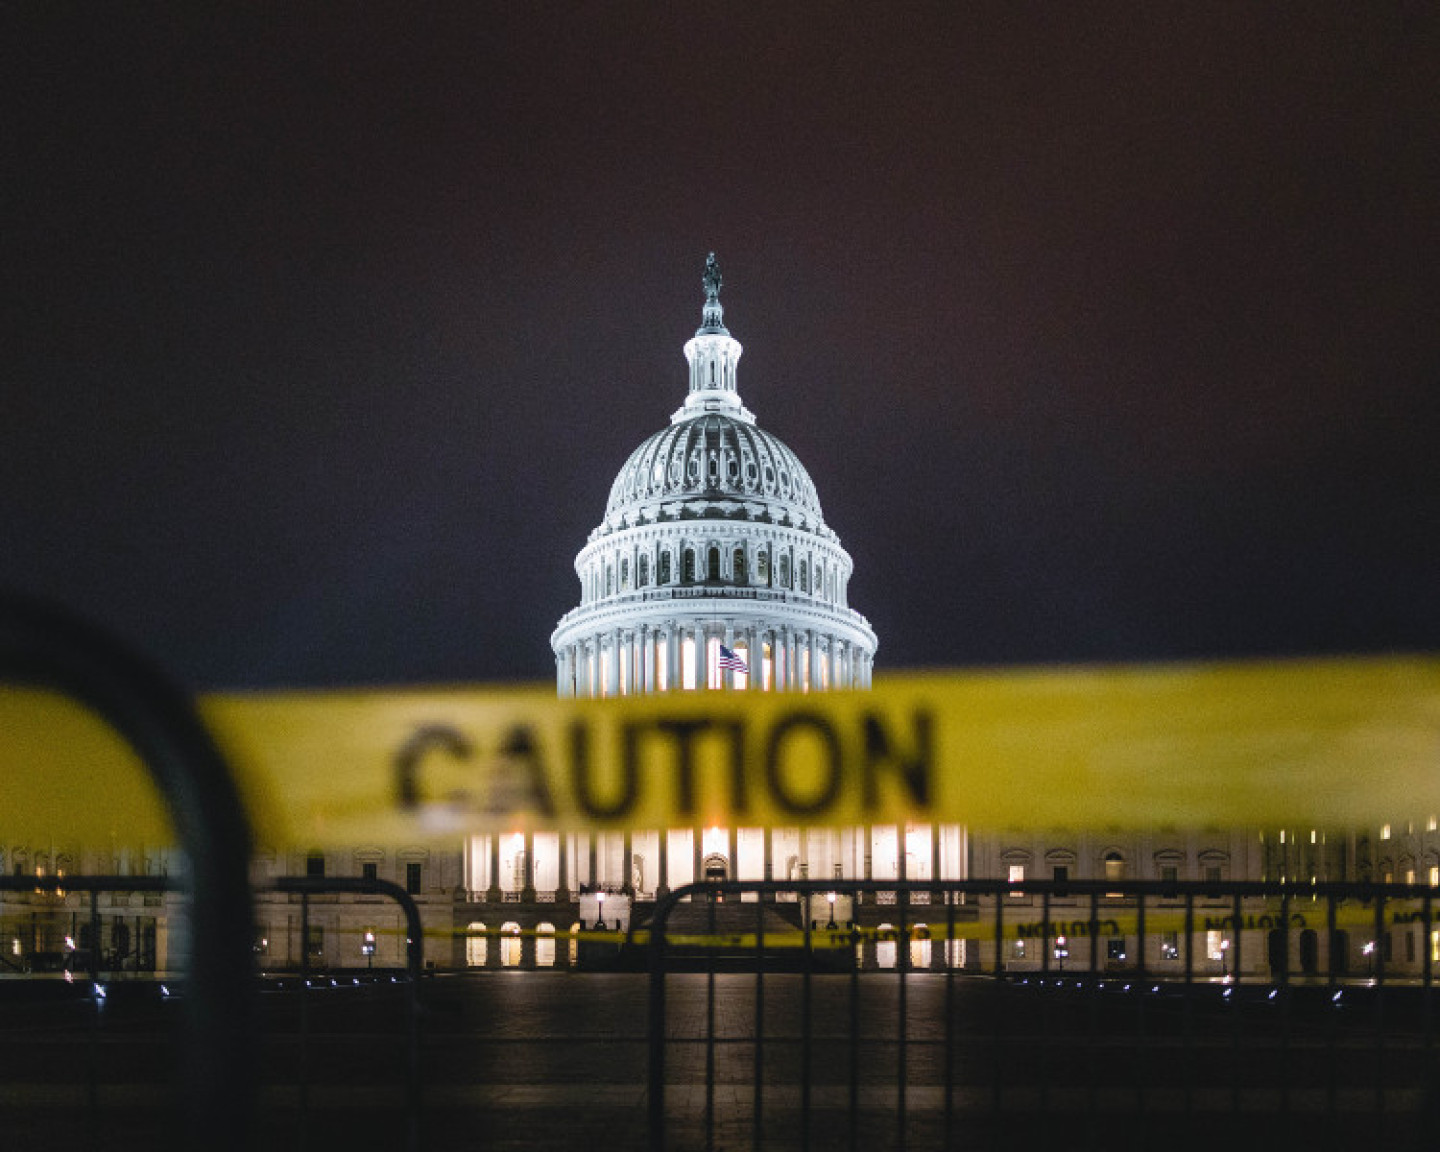 US Capitol Building with Caution Tape